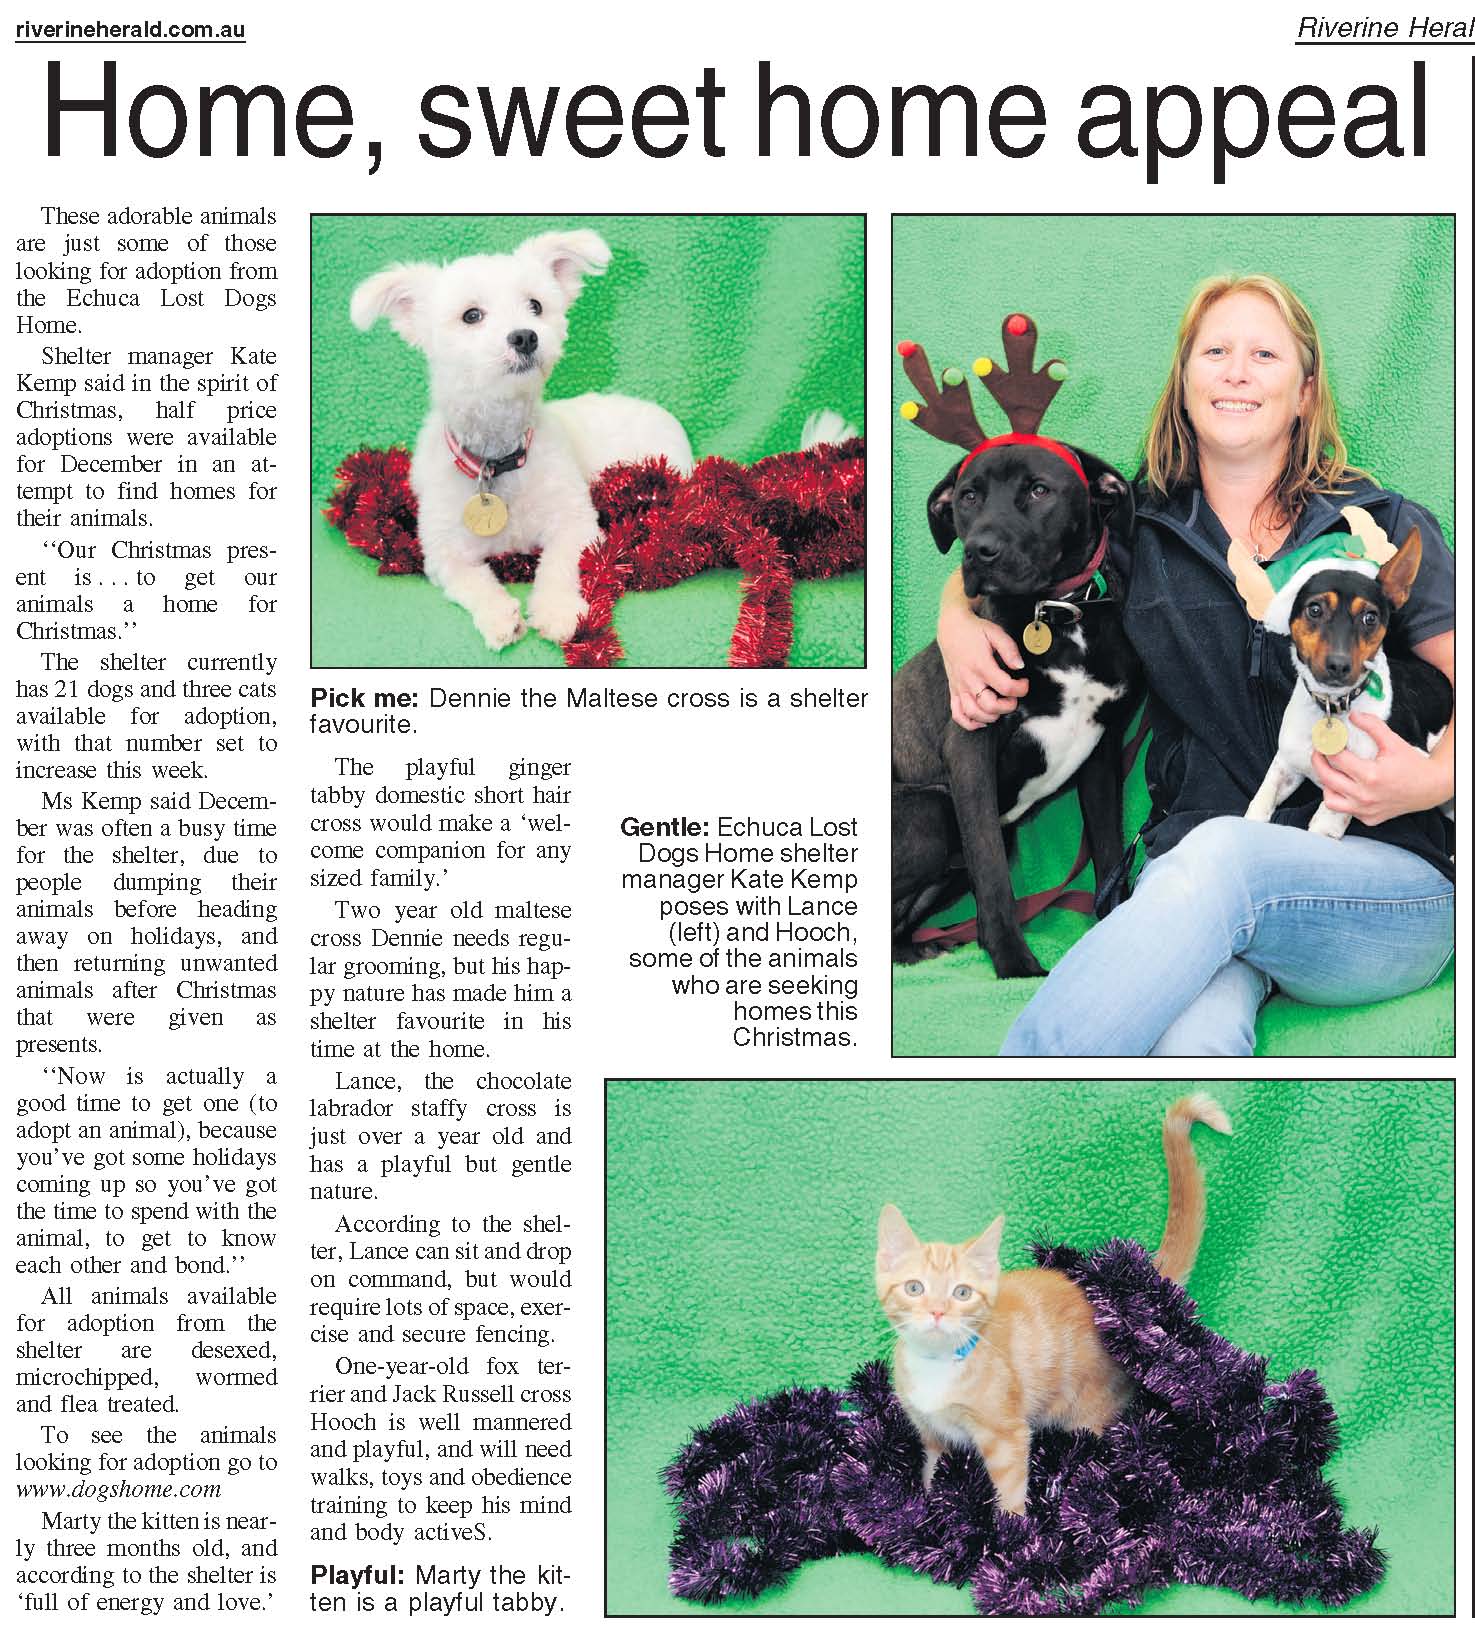 Echuca's lost cats and dogs need home for Christmas - Lost Dogs Home